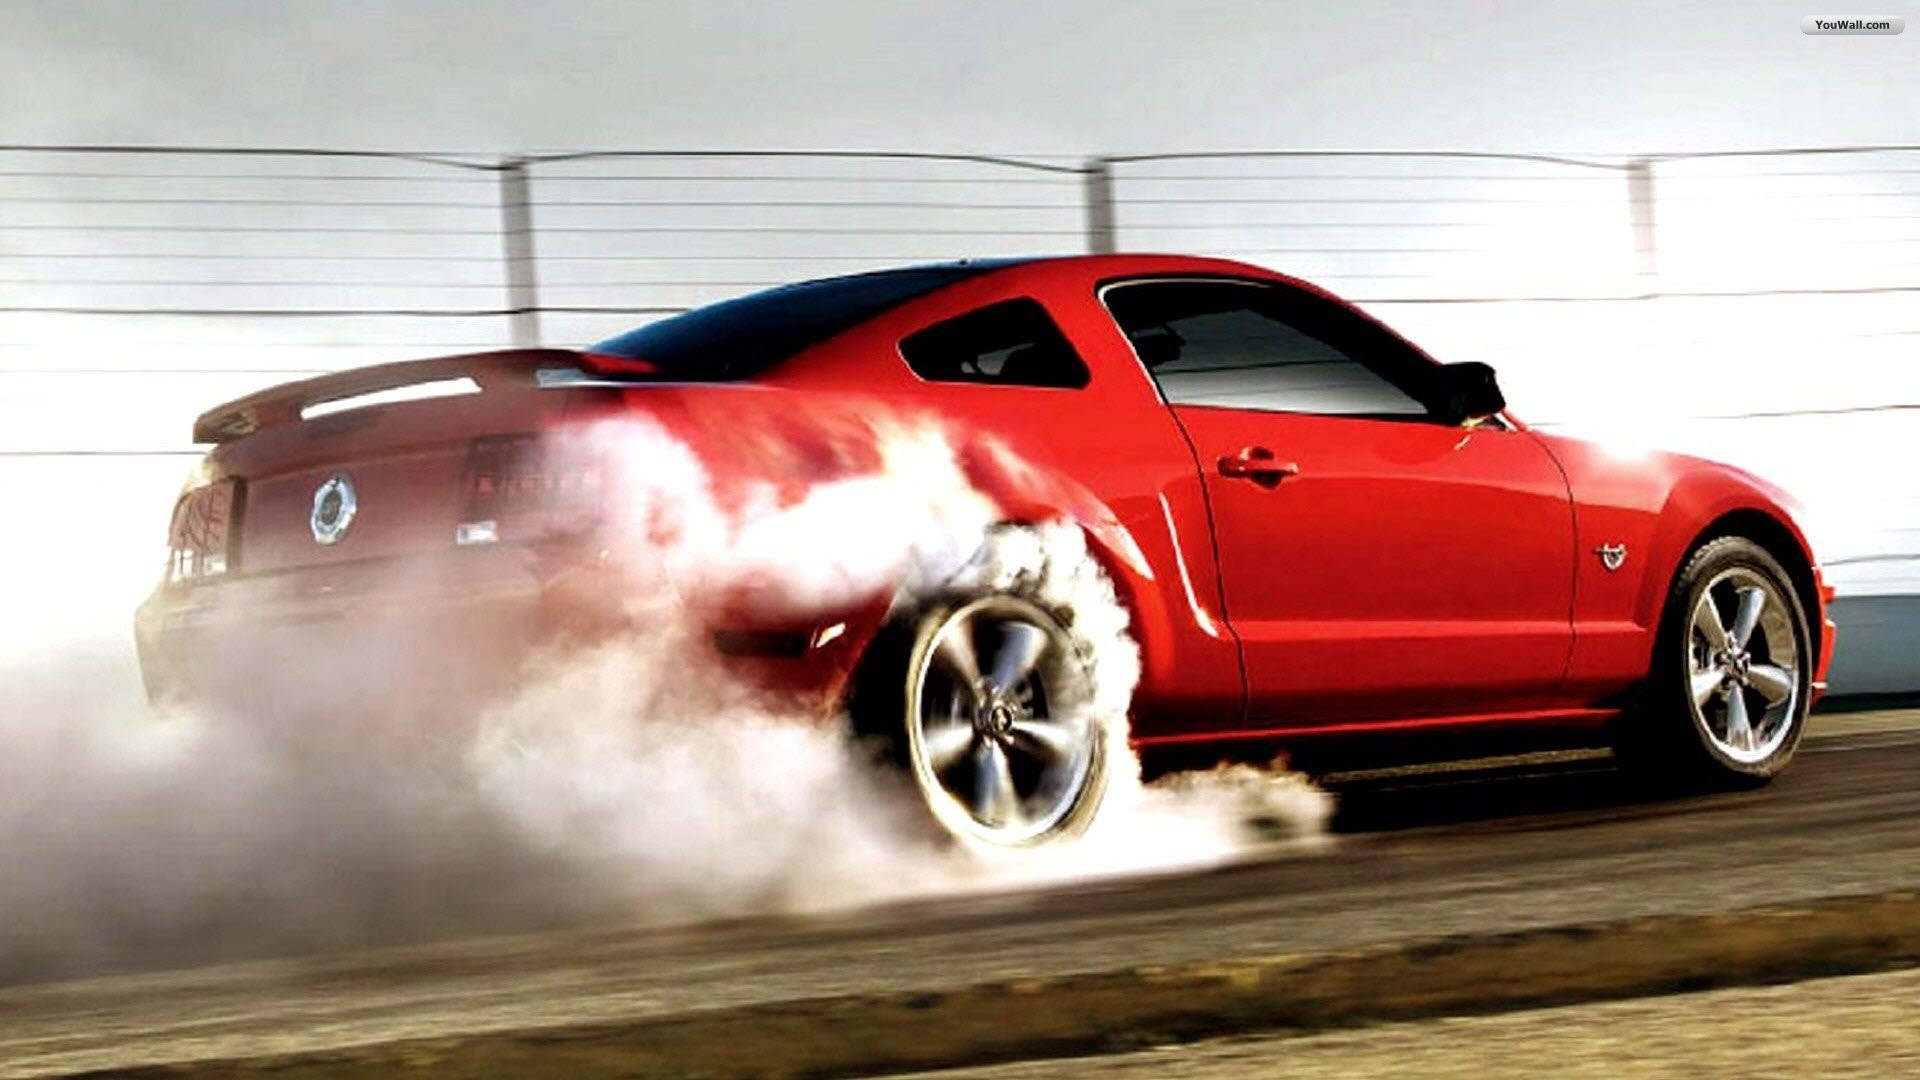 1920x1080 Red Ford Mustang Wallpaper